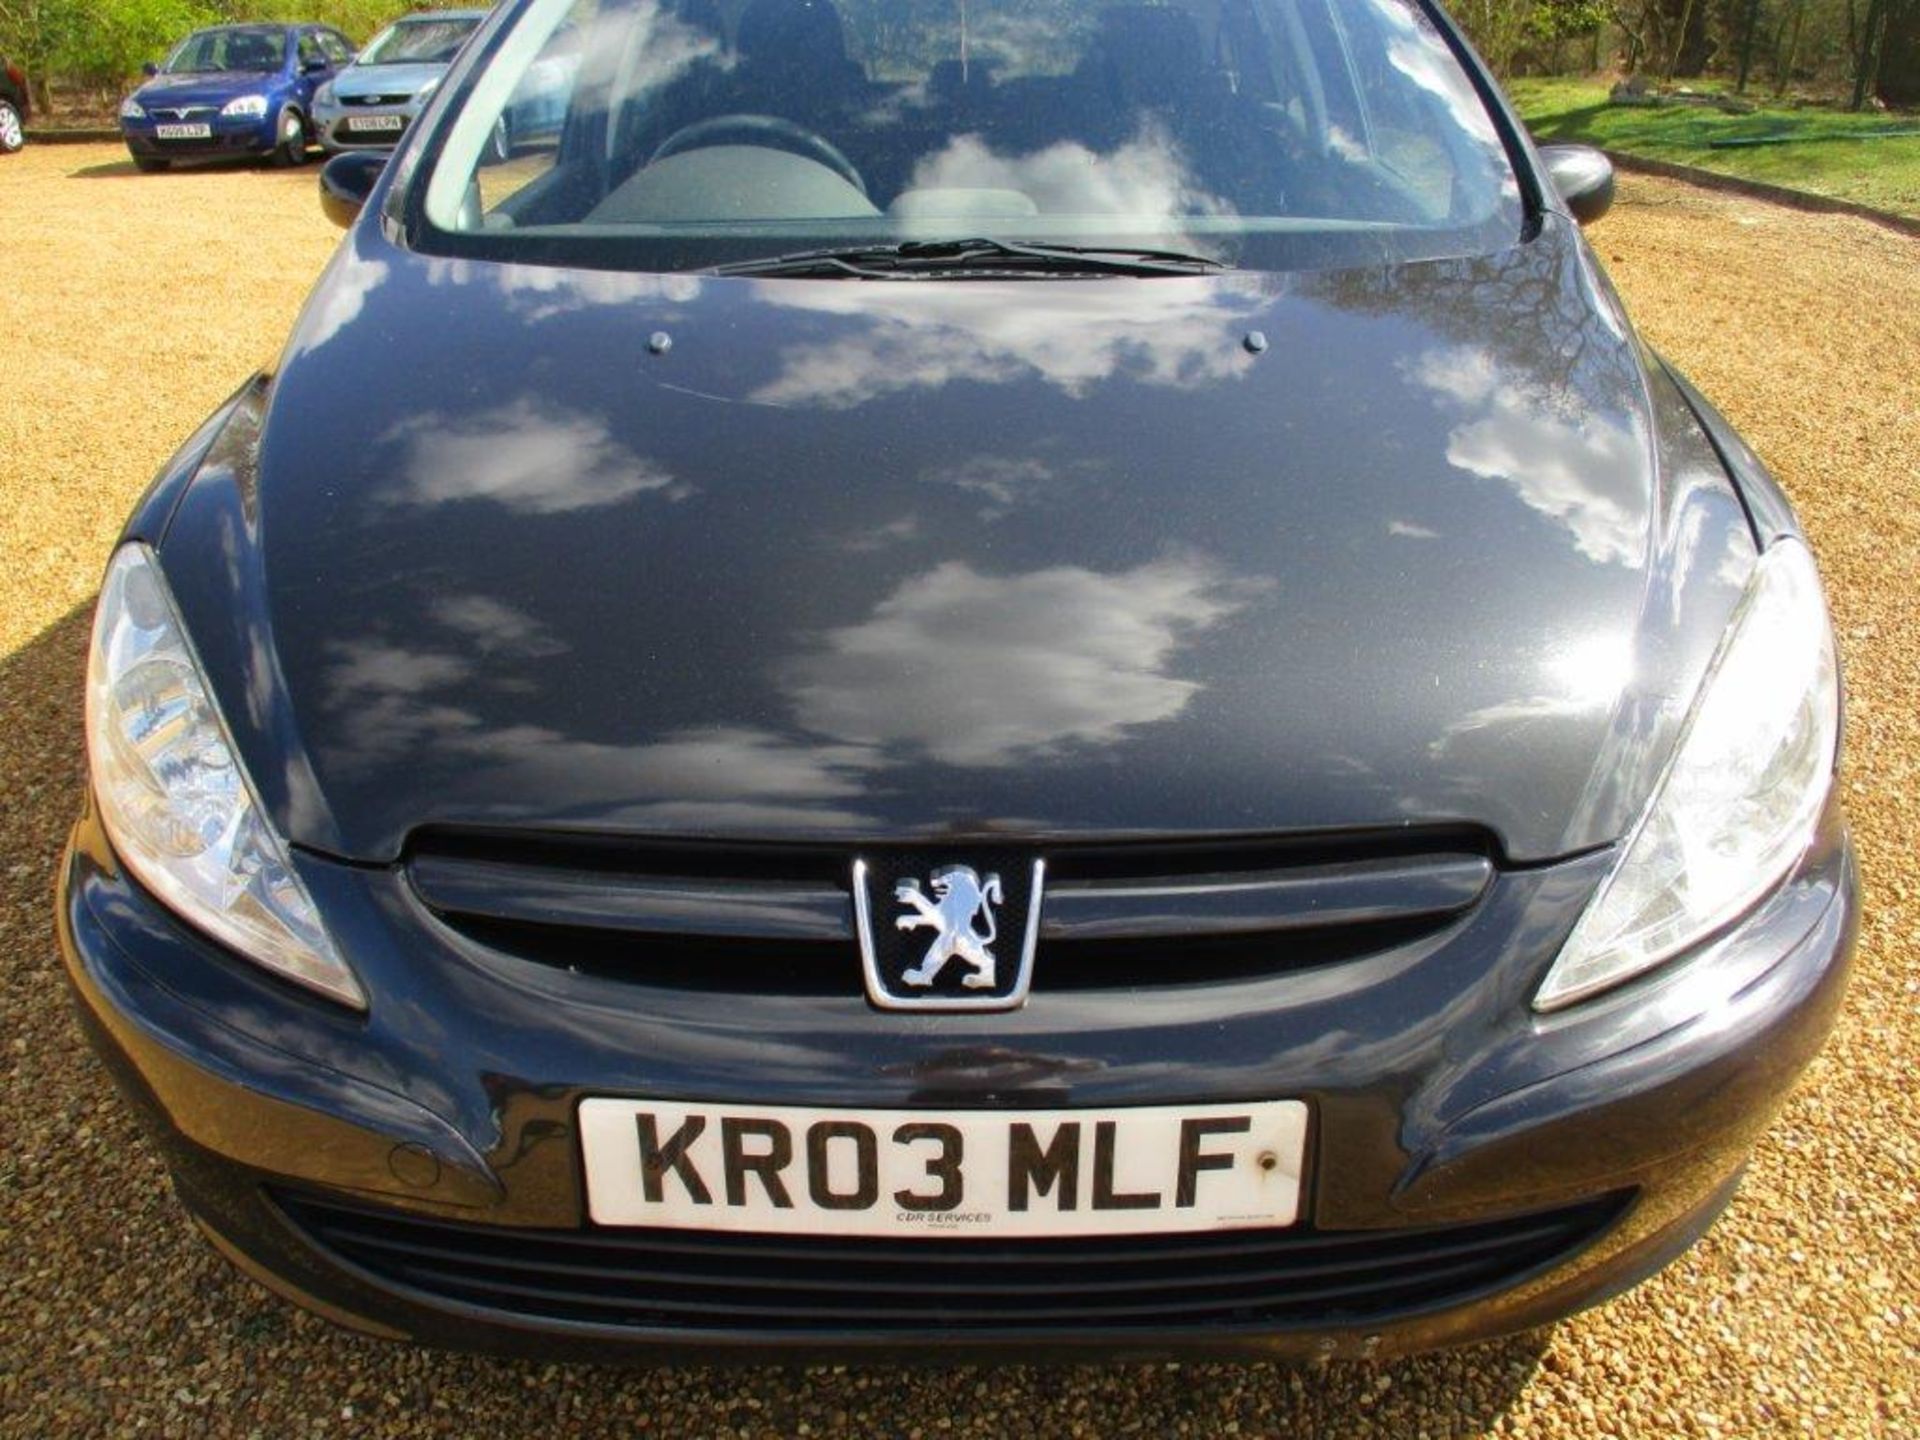 03 03 Peugeot 307 S HDI 110 - Image 3 of 21